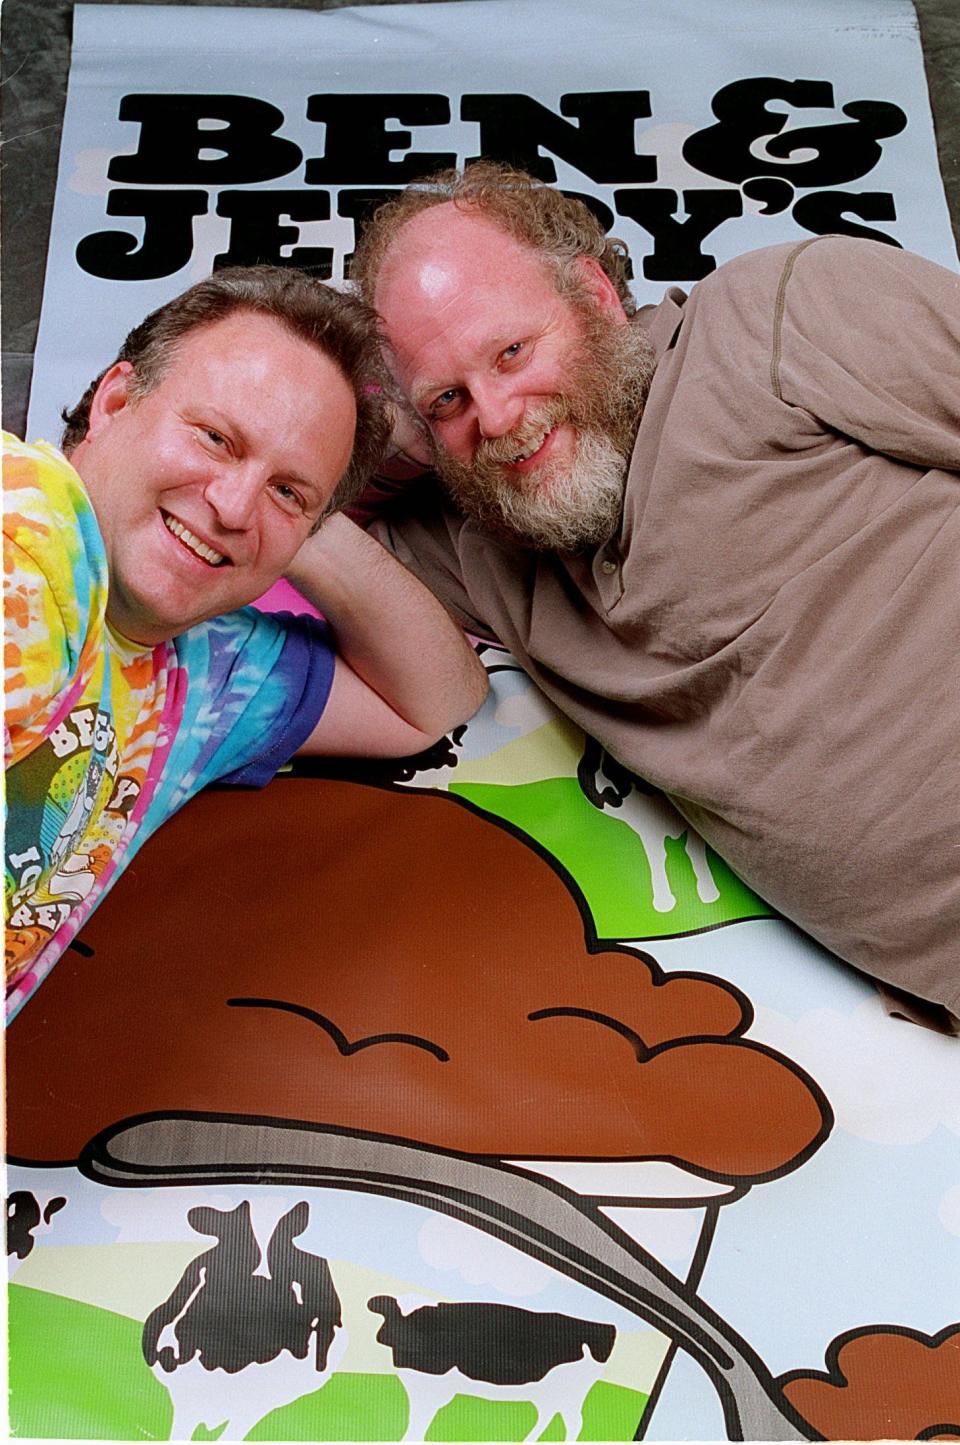 L-R Jerry Greenfield and Ben Cohen, Chairmen of Ben & Jerry's Ice Cream.